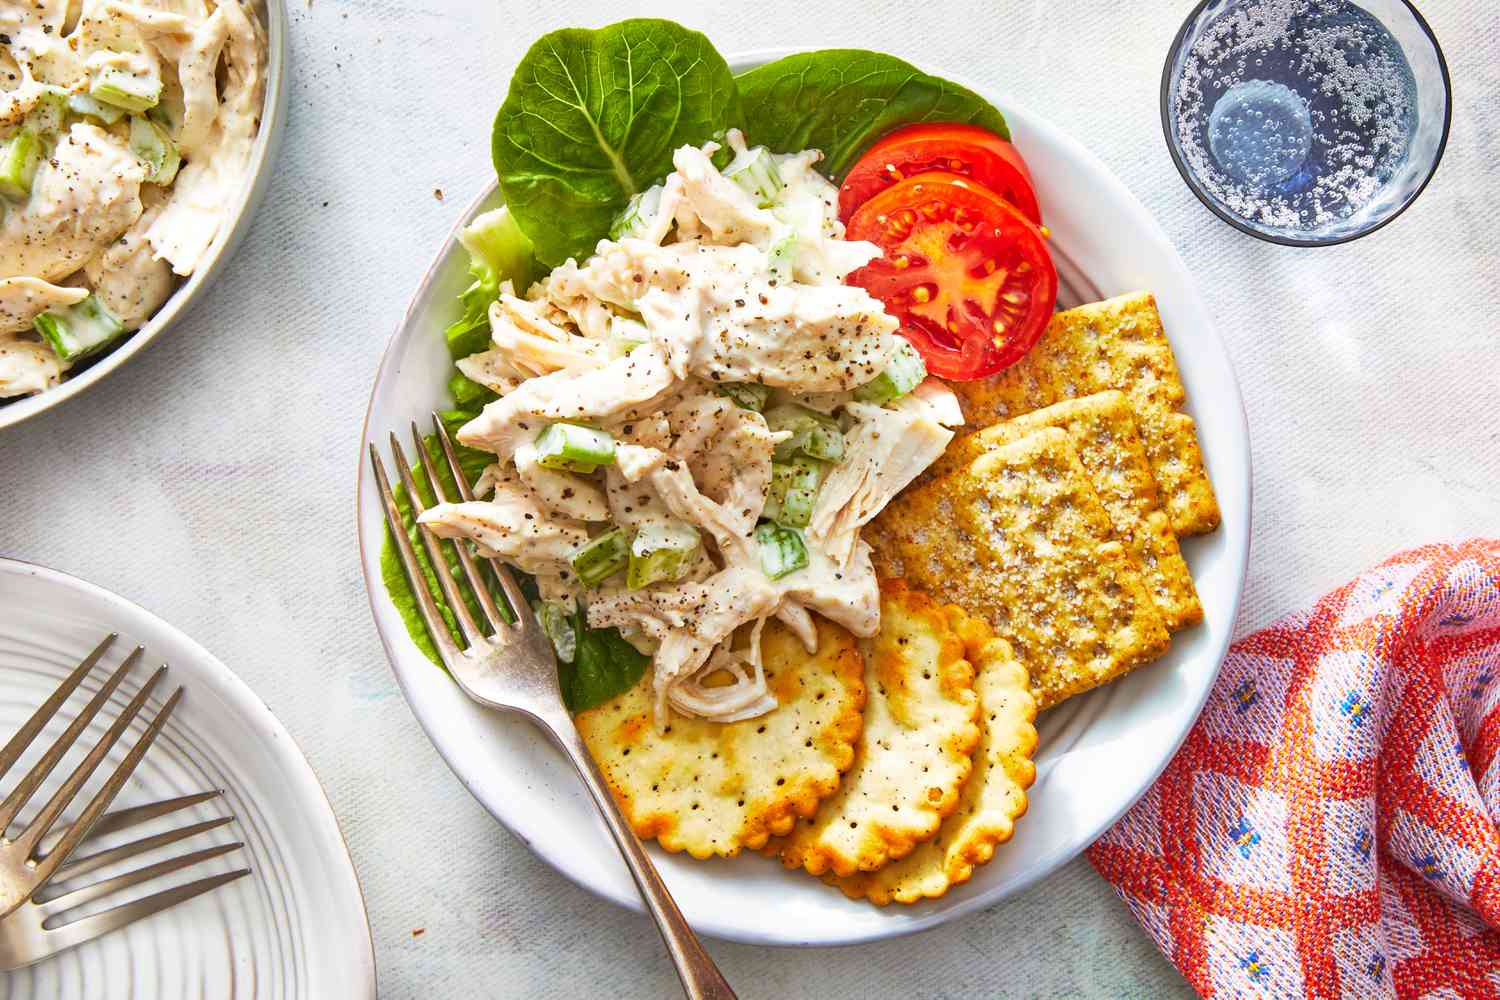 How To Eat Chicken Salad Crackers - Recipes.net